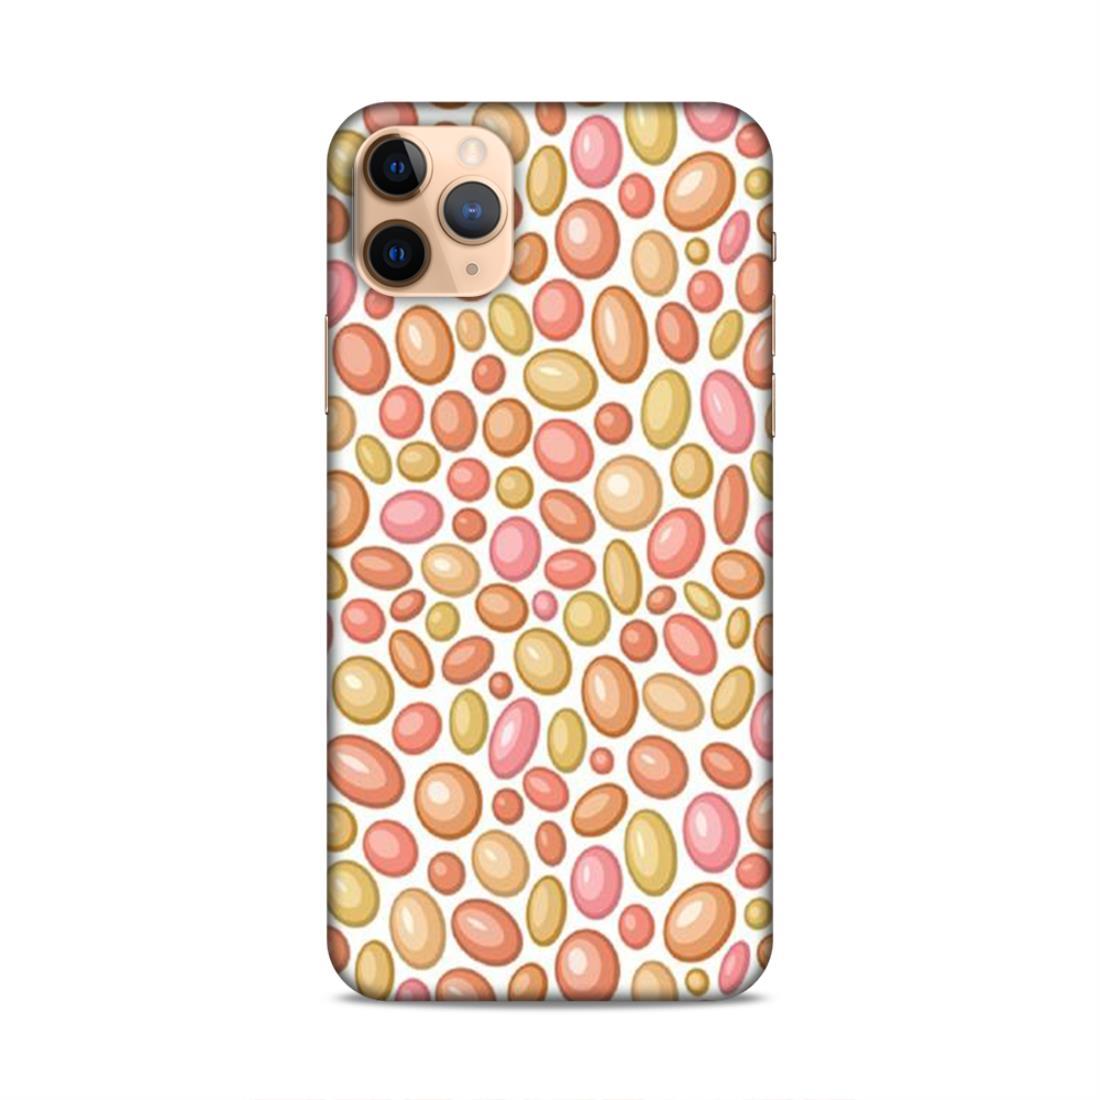 Fancy New Pattern iPhone 11 Pro Phone Case Cover